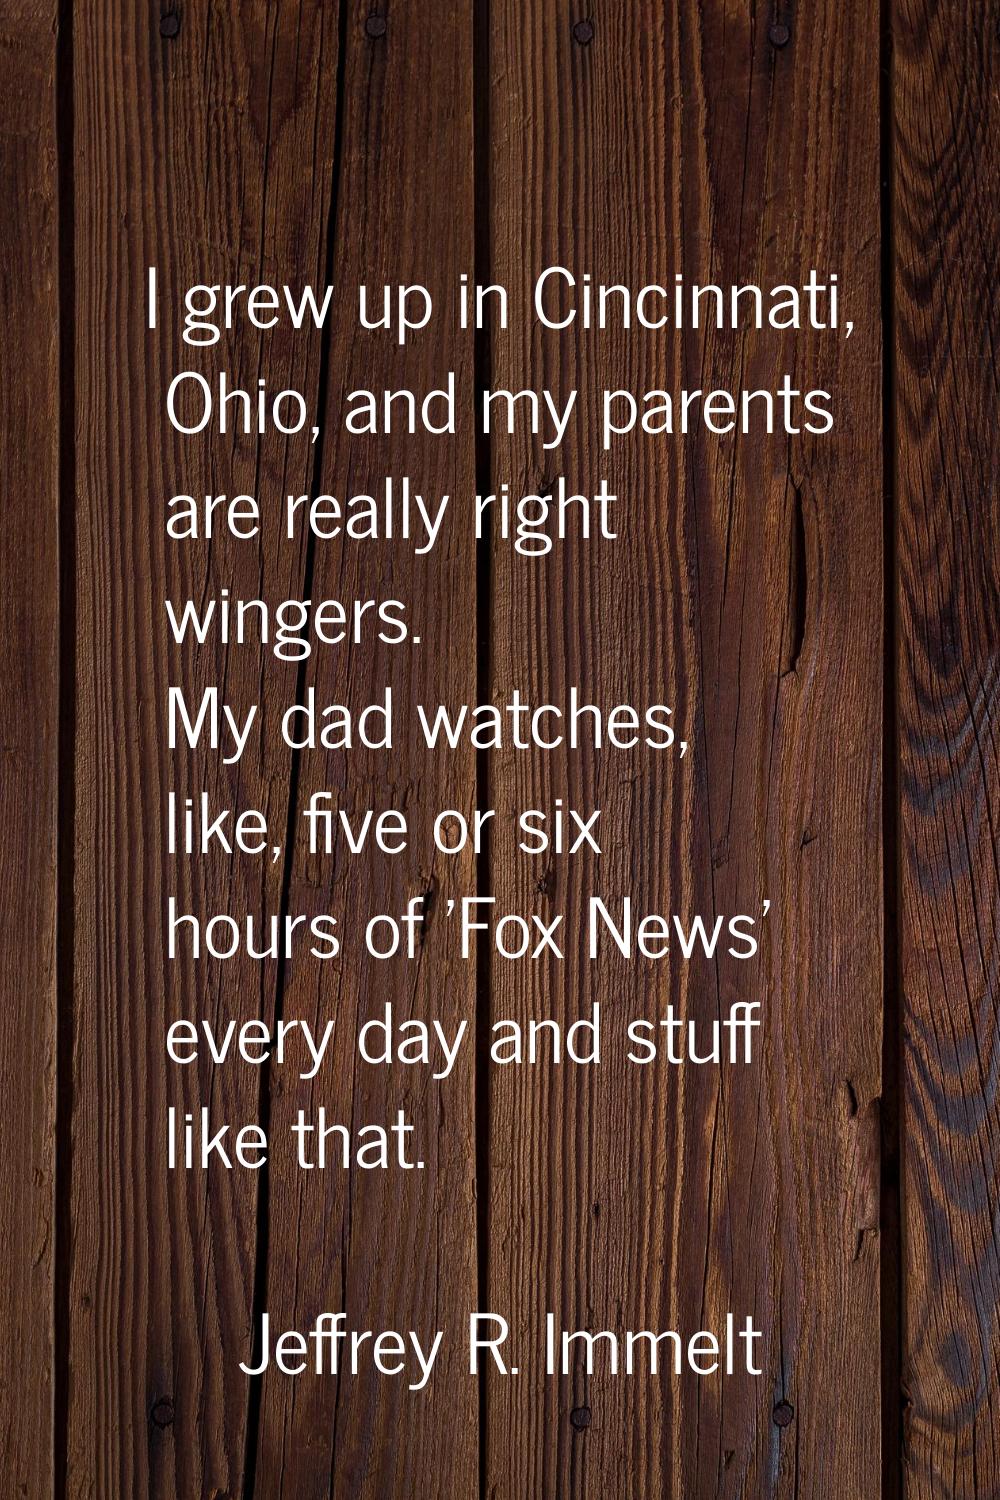 I grew up in Cincinnati, Ohio, and my parents are really right wingers. My dad watches, like, five 